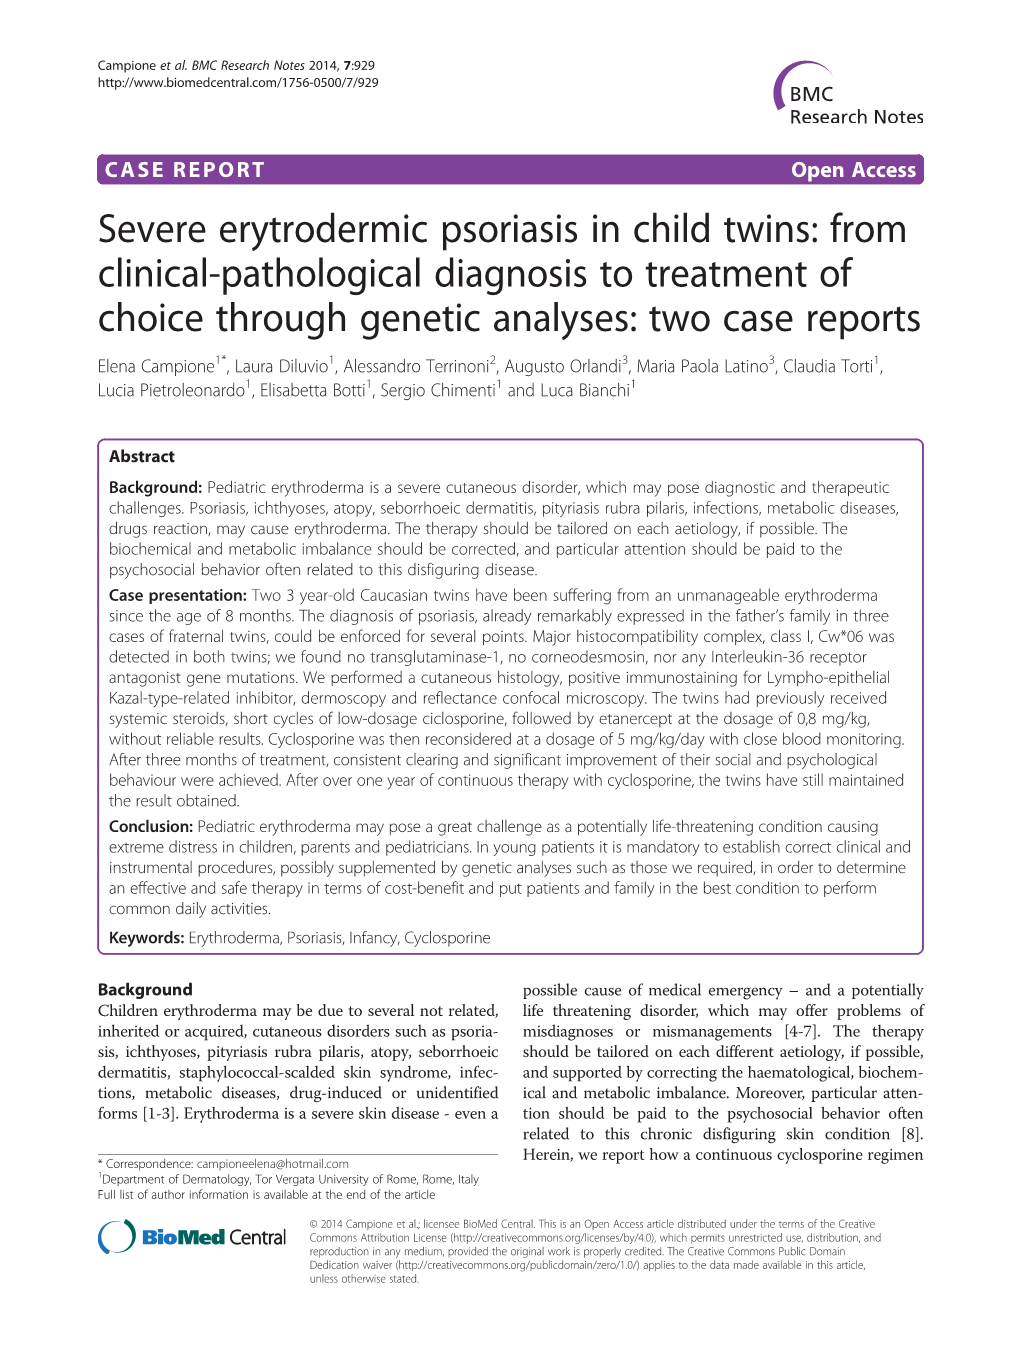 Severe Erytrodermic Psoriasis in Child Twins: from Clinical-Pathological